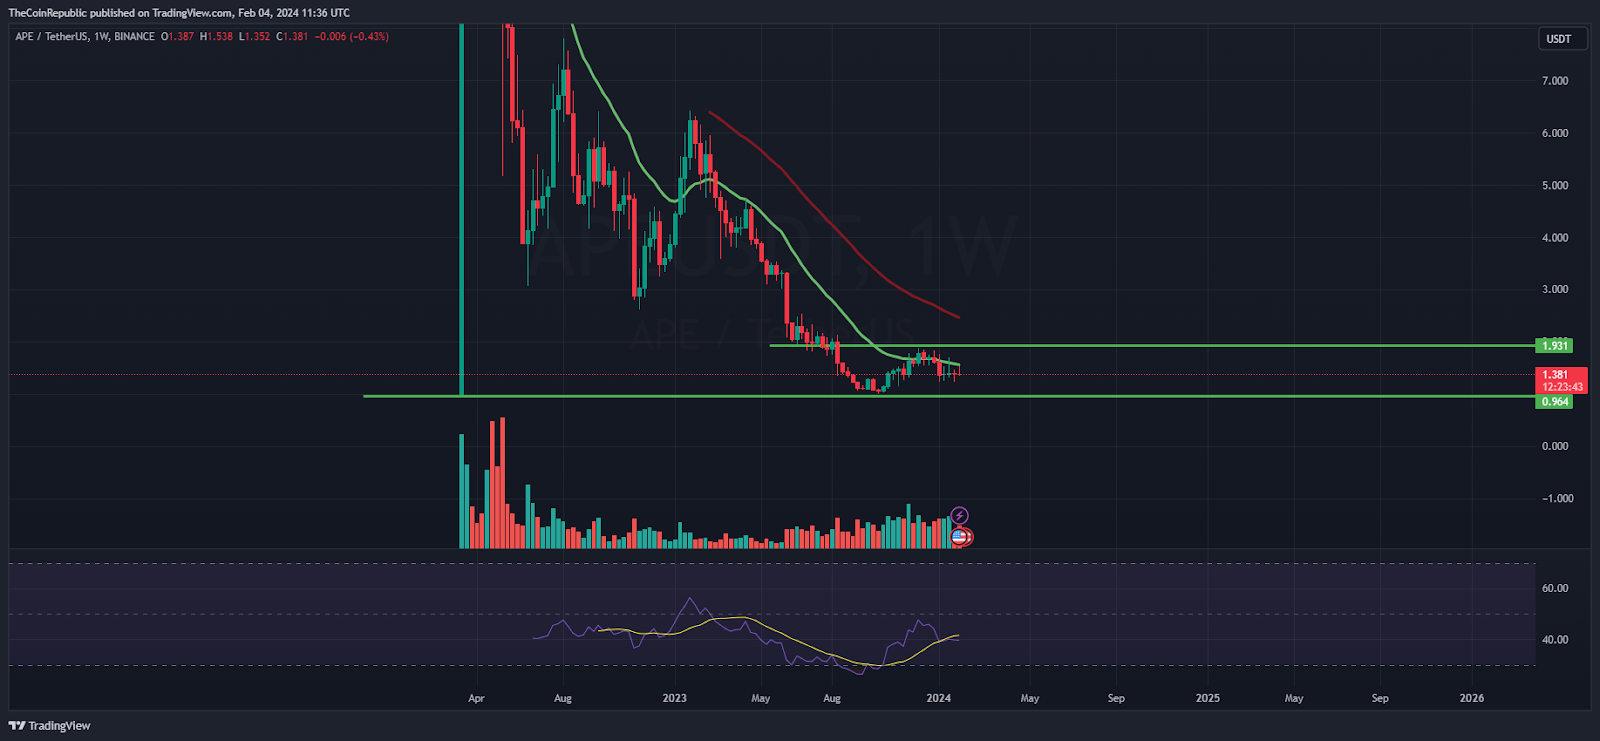 APE Price Prediction: Is APE Ready For A Downmove Below $1.20?